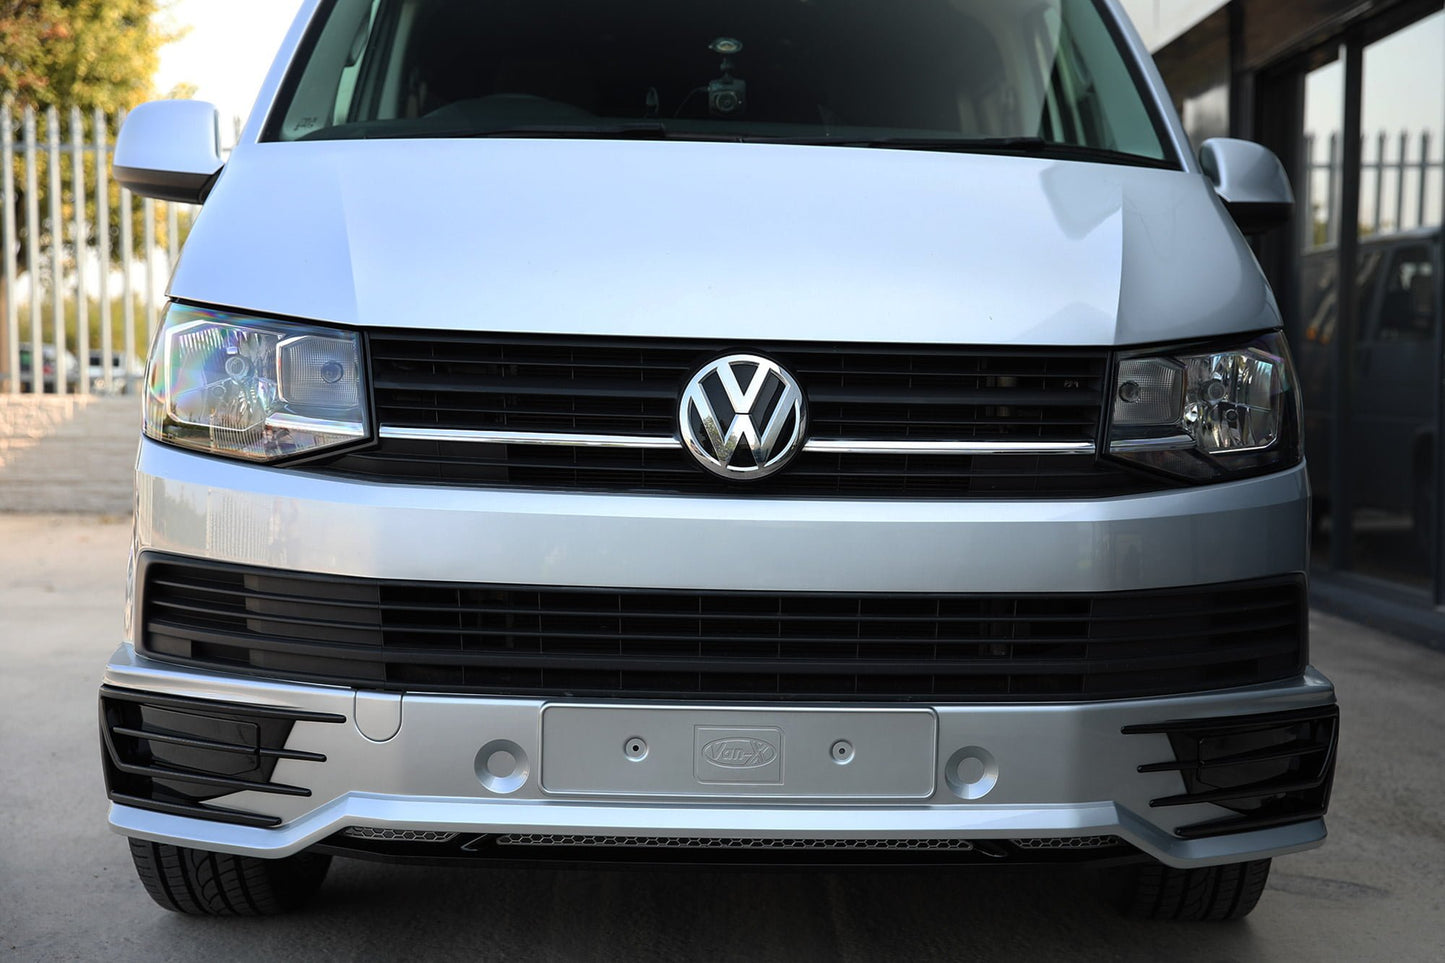 VW T6 Transporter Front Bumper Sportline Style Spoiler (B-Grade) Painted and ready to fit in 3 colour options